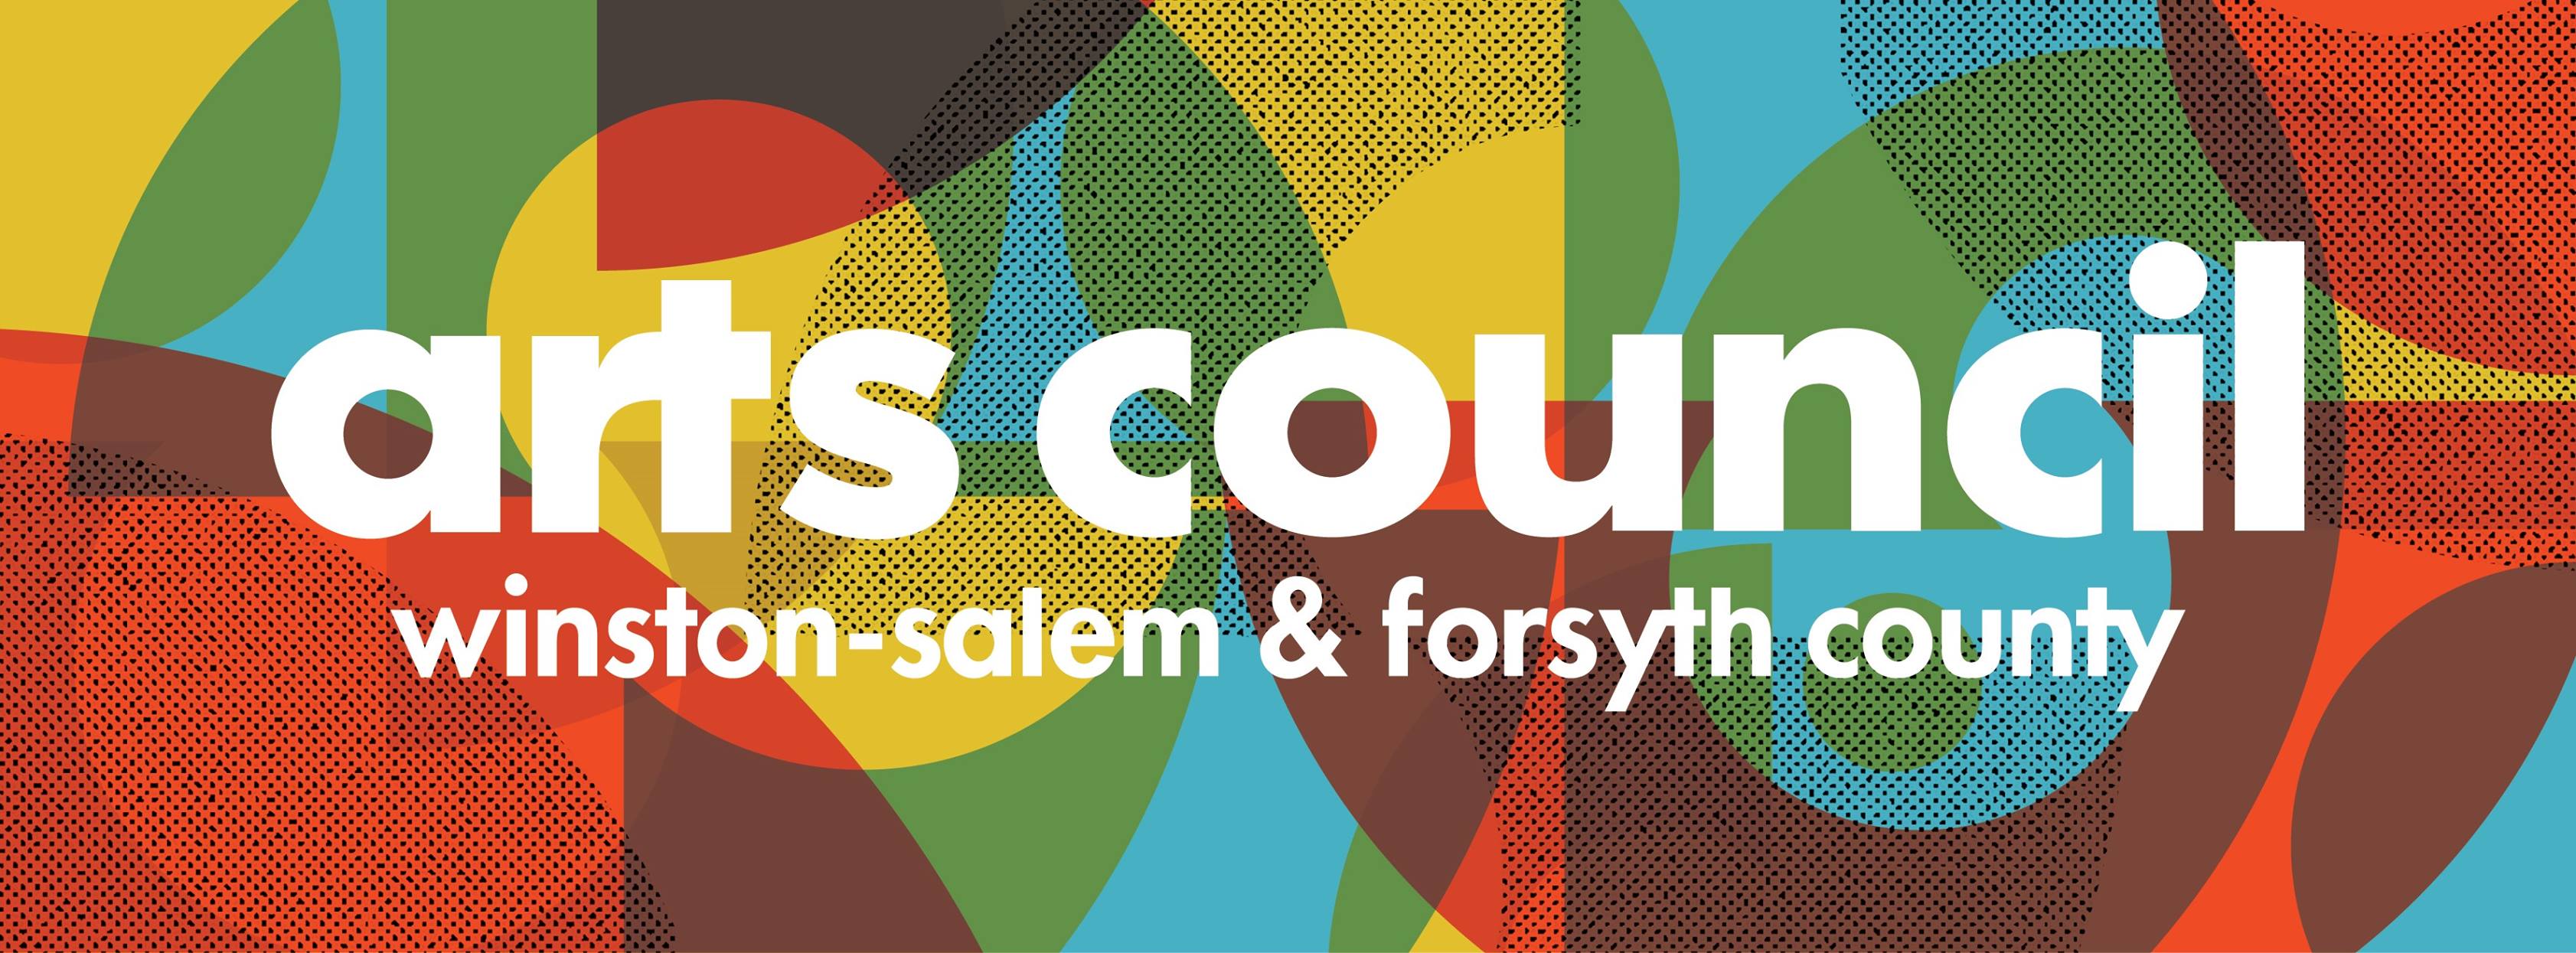 Arts Council of Winston Salem and Forsyth County EarlyGroove